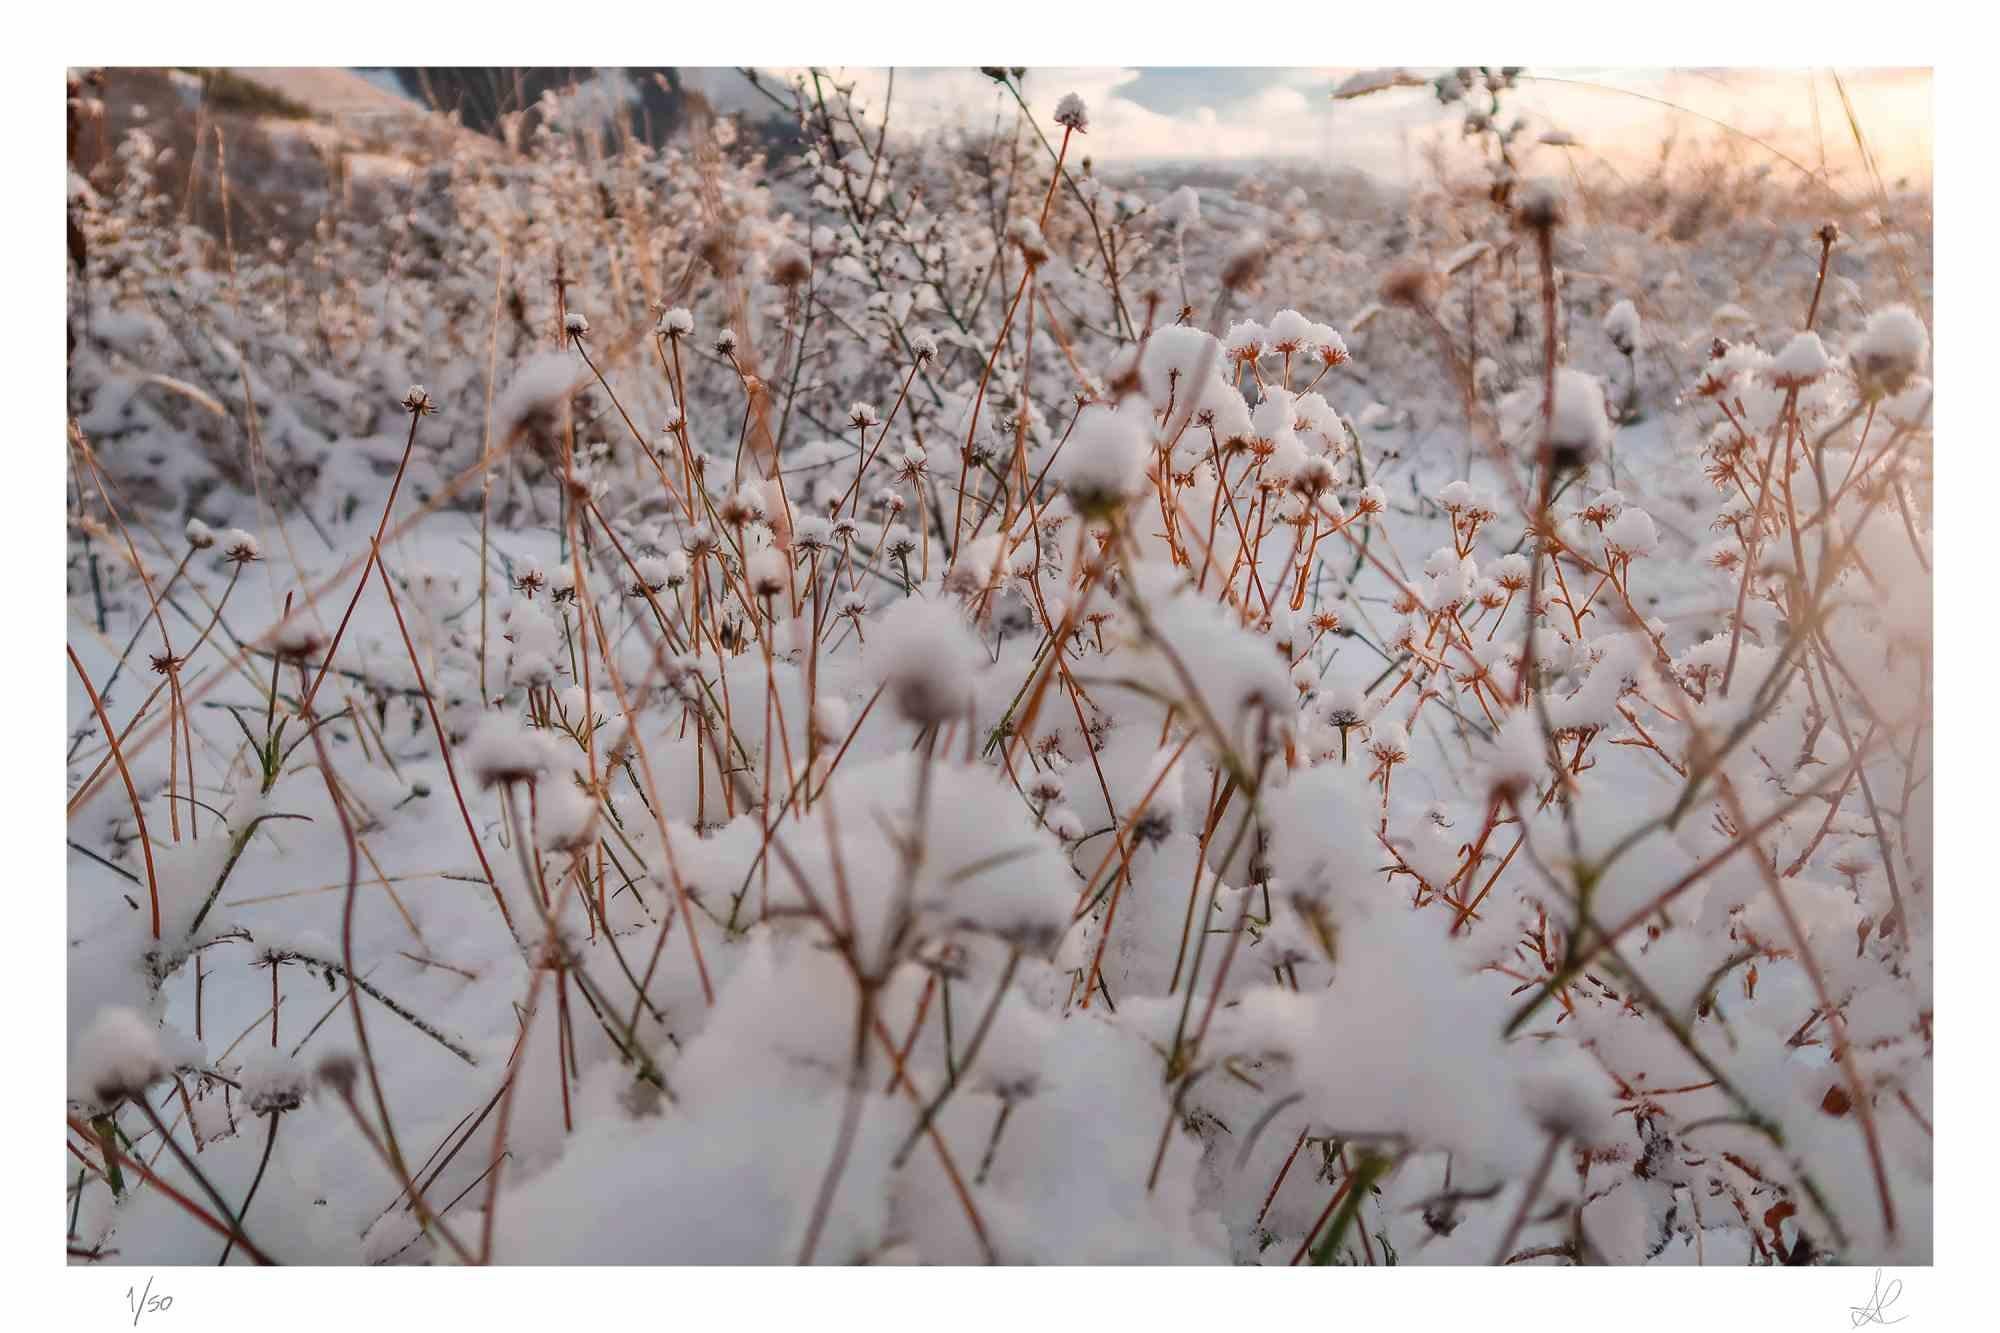 Winter is a photograph taken by Amanda Ludovisi in 2021.

It represents some dry flowers emerging from the snow as an attempt to live. This is a giclée print on Canson Baryta Matt paper. Limited edition of 50 copies.

Monogrammed on the lower right